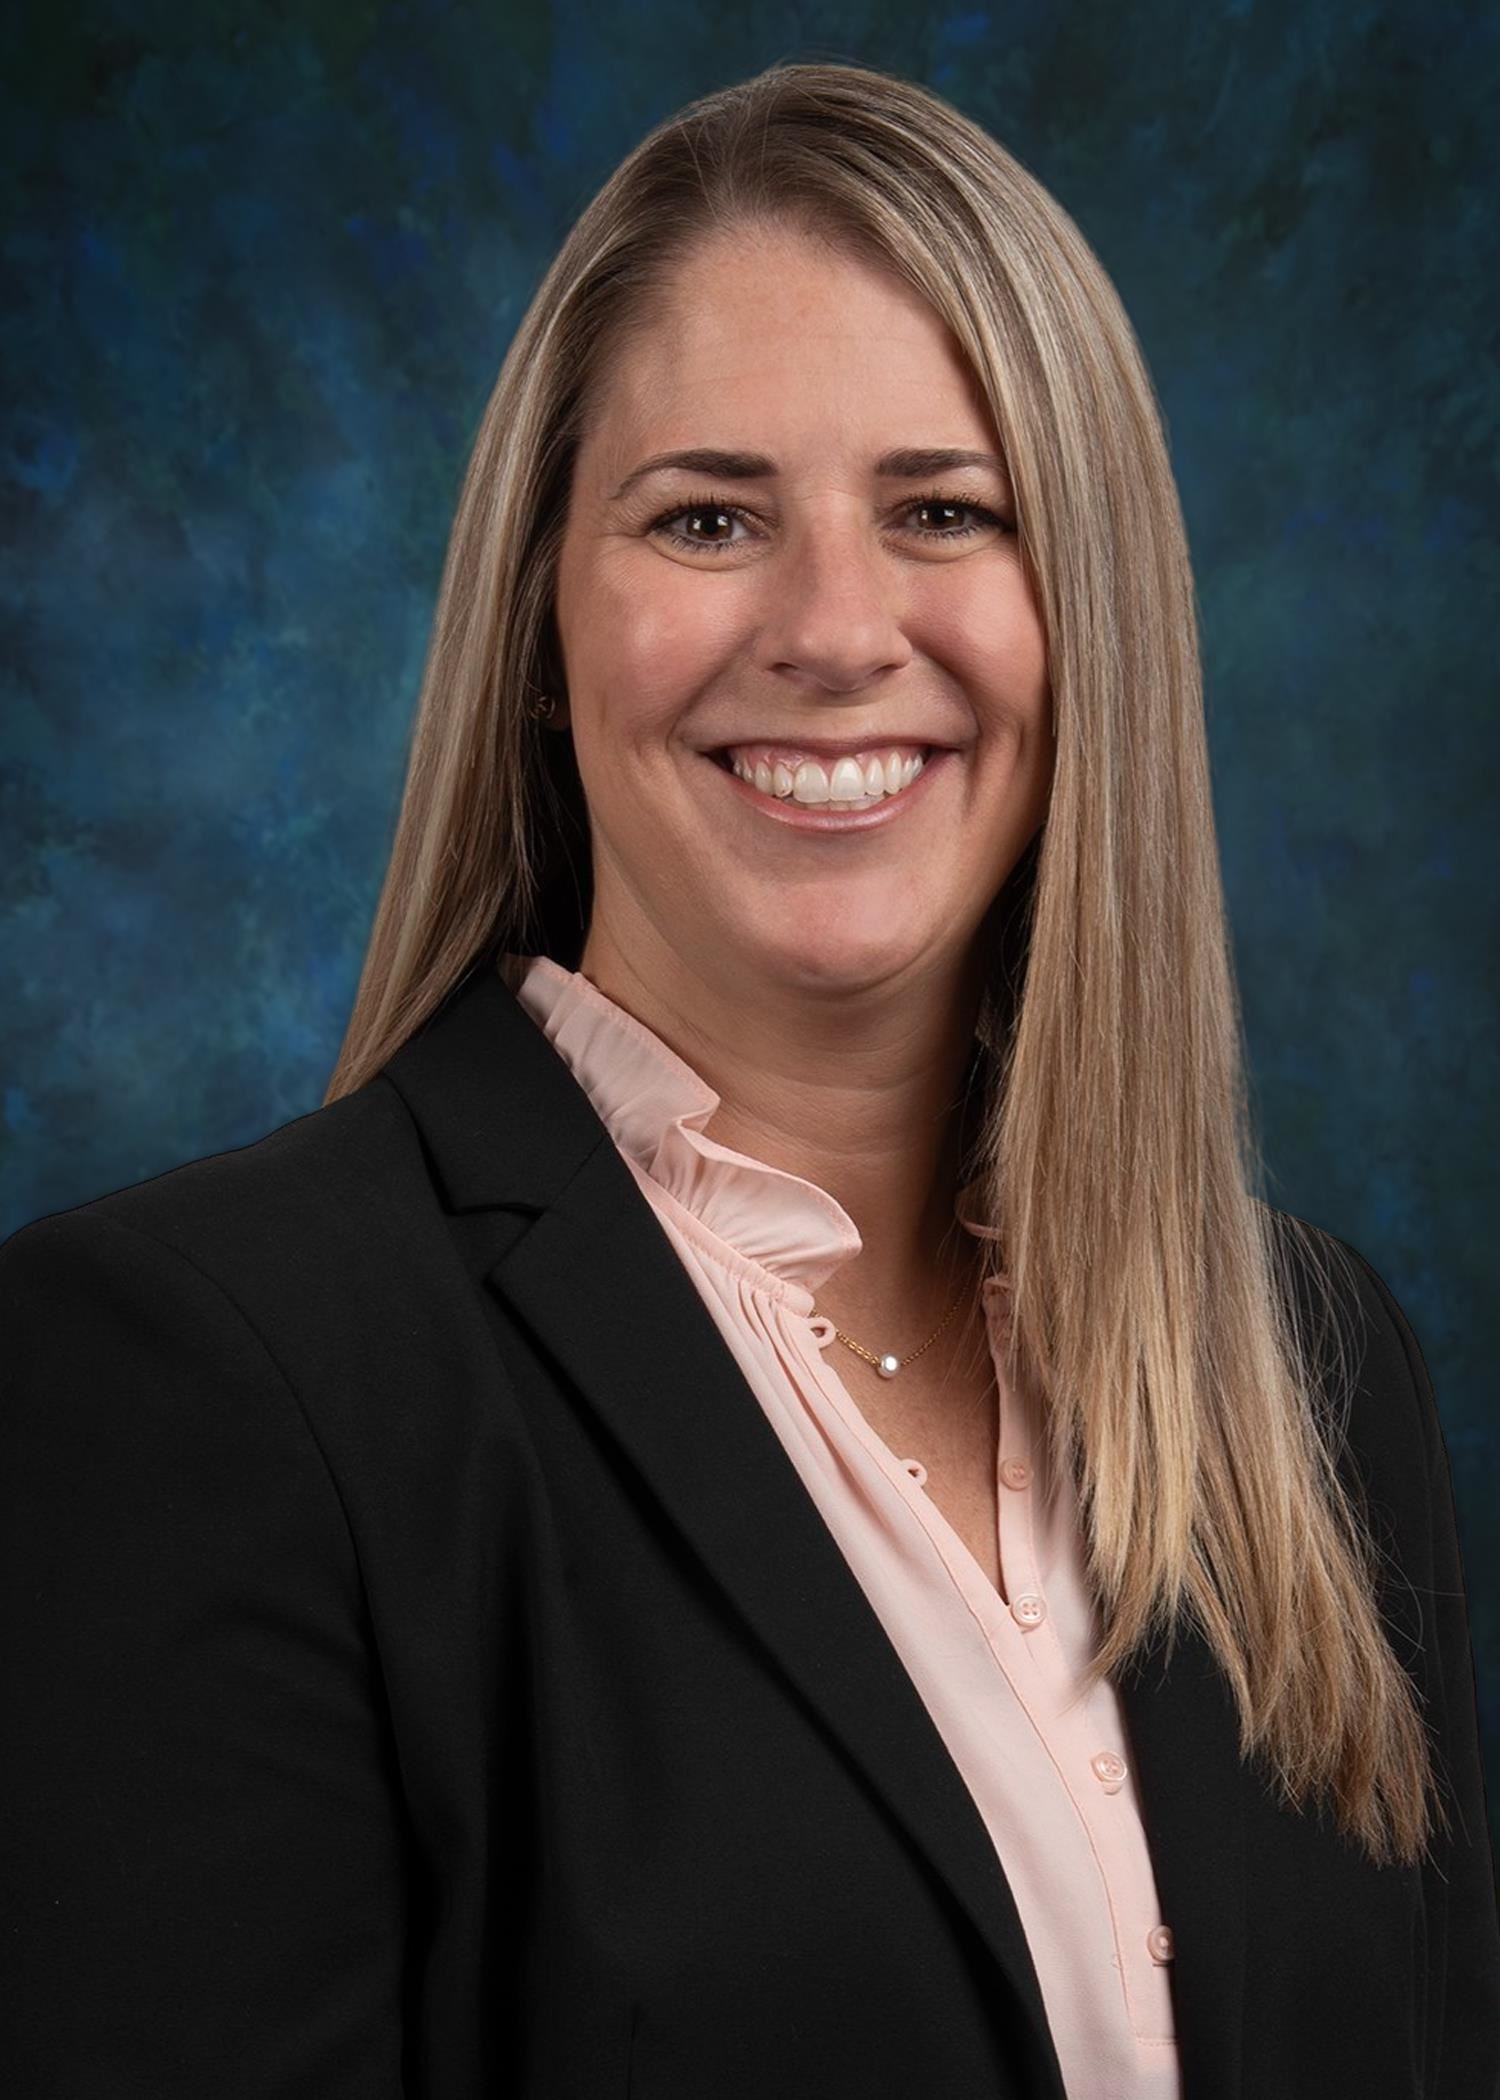 Stefanie Berger, assistant principal at Copeland Elementary School, was named the new principal at Copeland on May 16. 